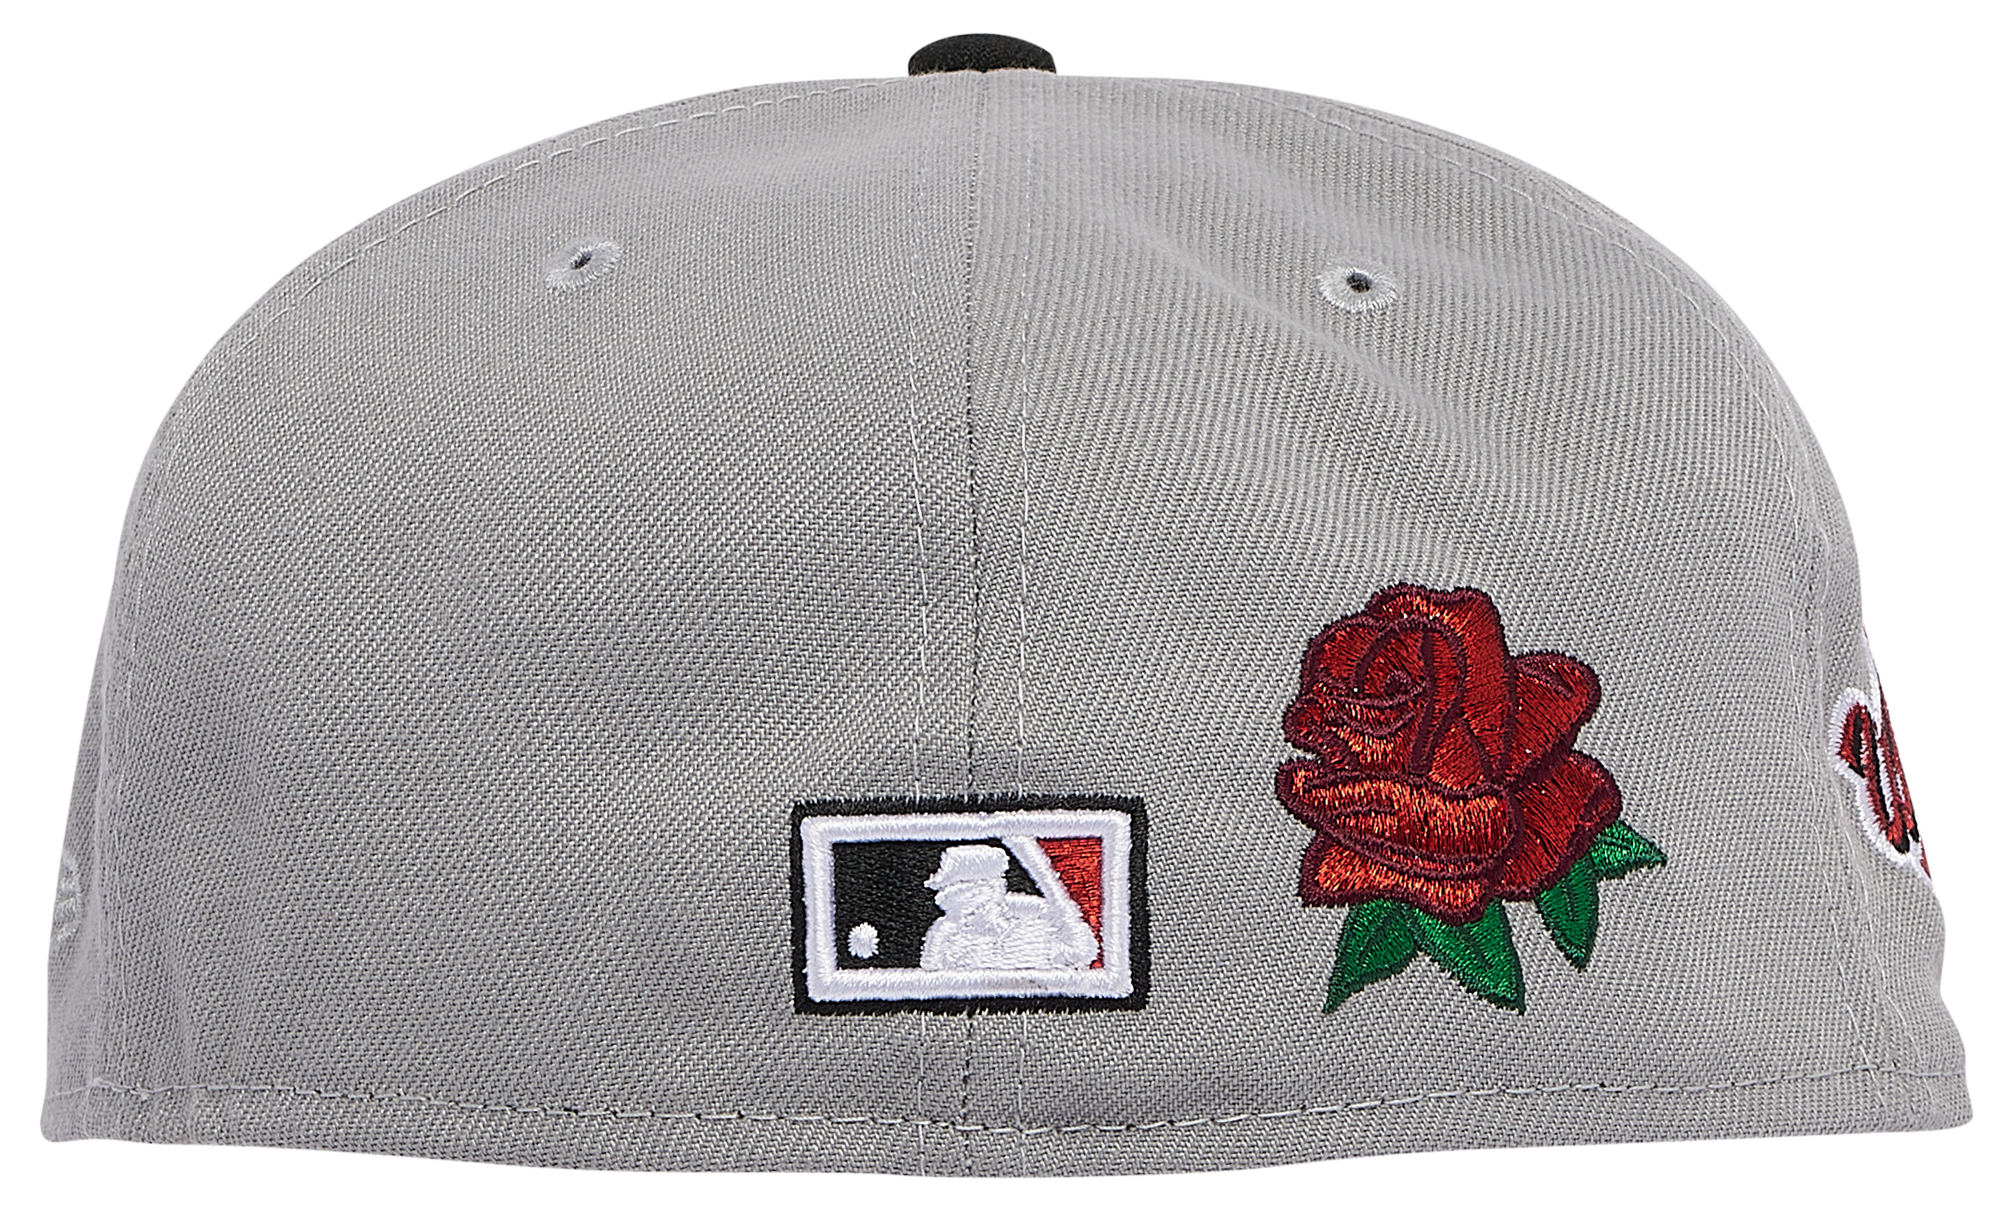 New Era Braves 2T Roses Side Patch Fitted Cap